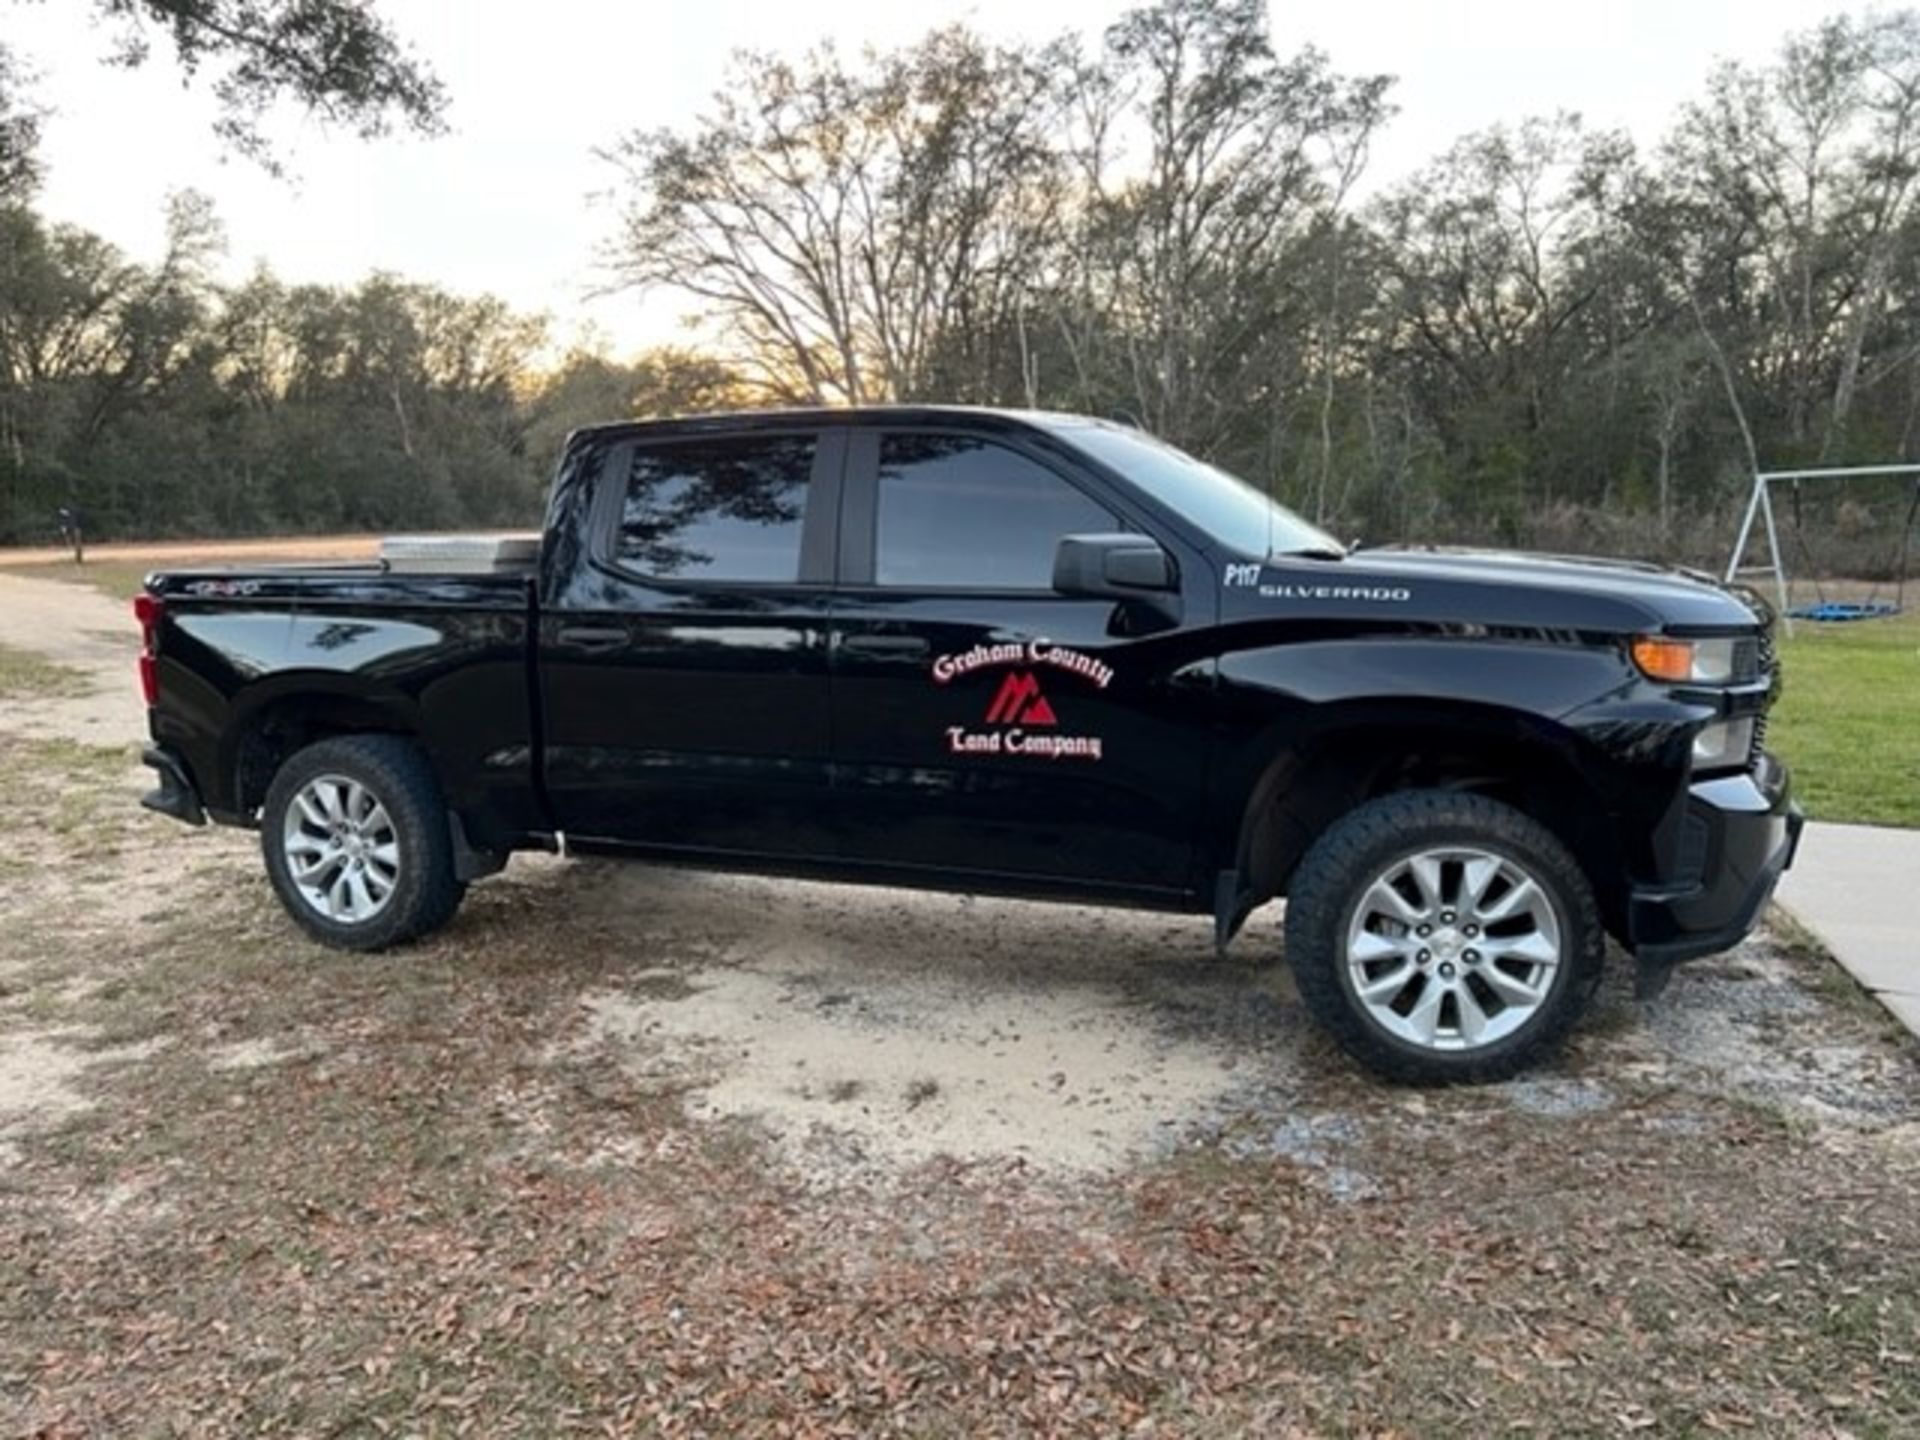 2020 Chevy Silverado 1500 4WD Crew Cab Pickup, VIN 1GCUYBEF1LZ151626, 92,000 Miles Indicated, P117 (